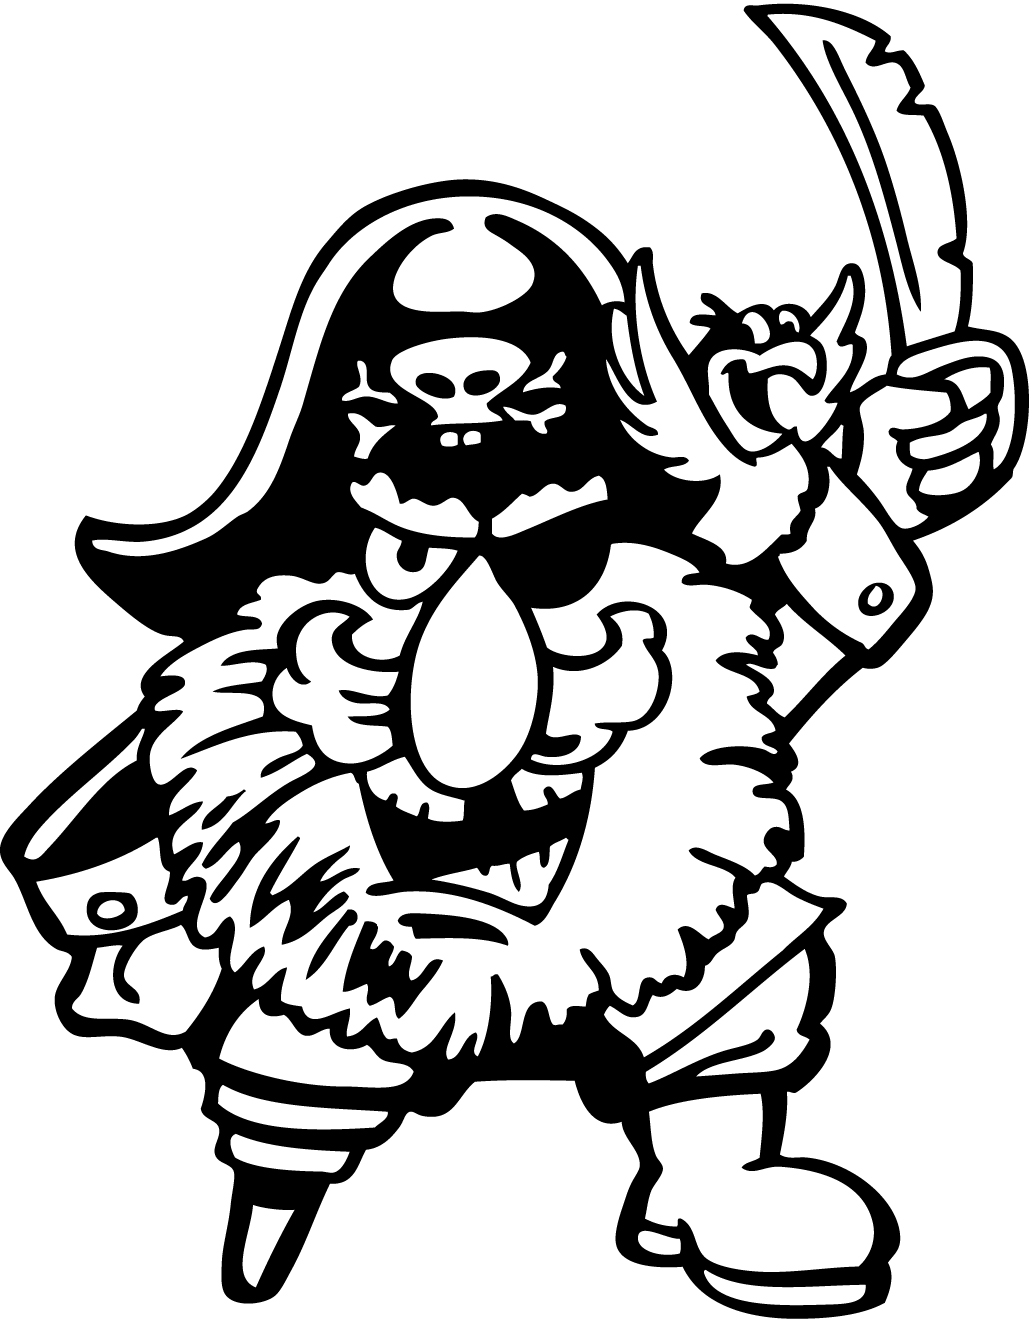 Pirate Clip Art Images & Pictures - Becuo